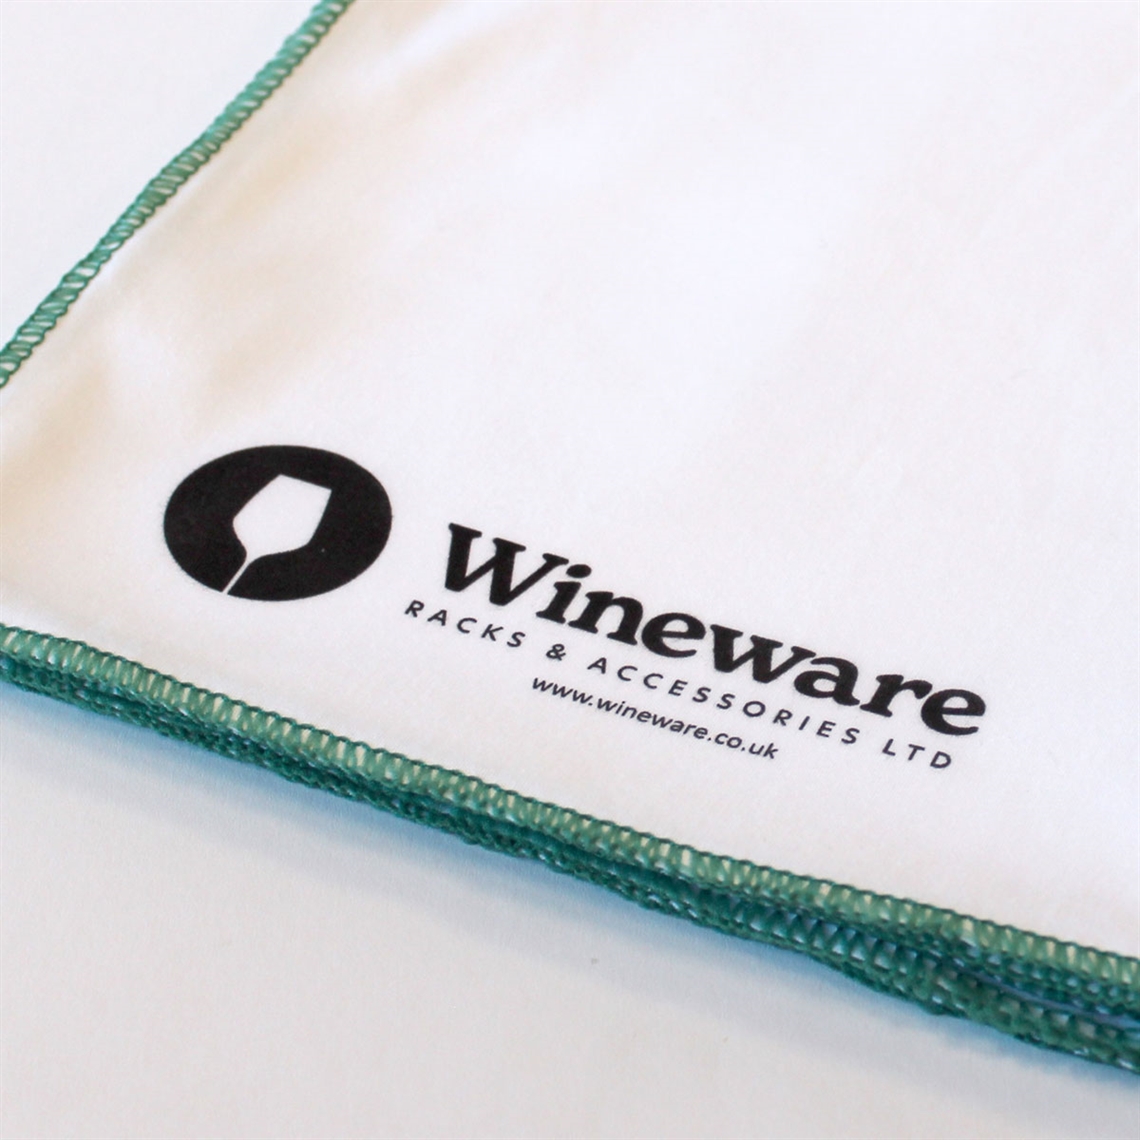 View more schott zwiesel from our Wine Decanter Cleaning range